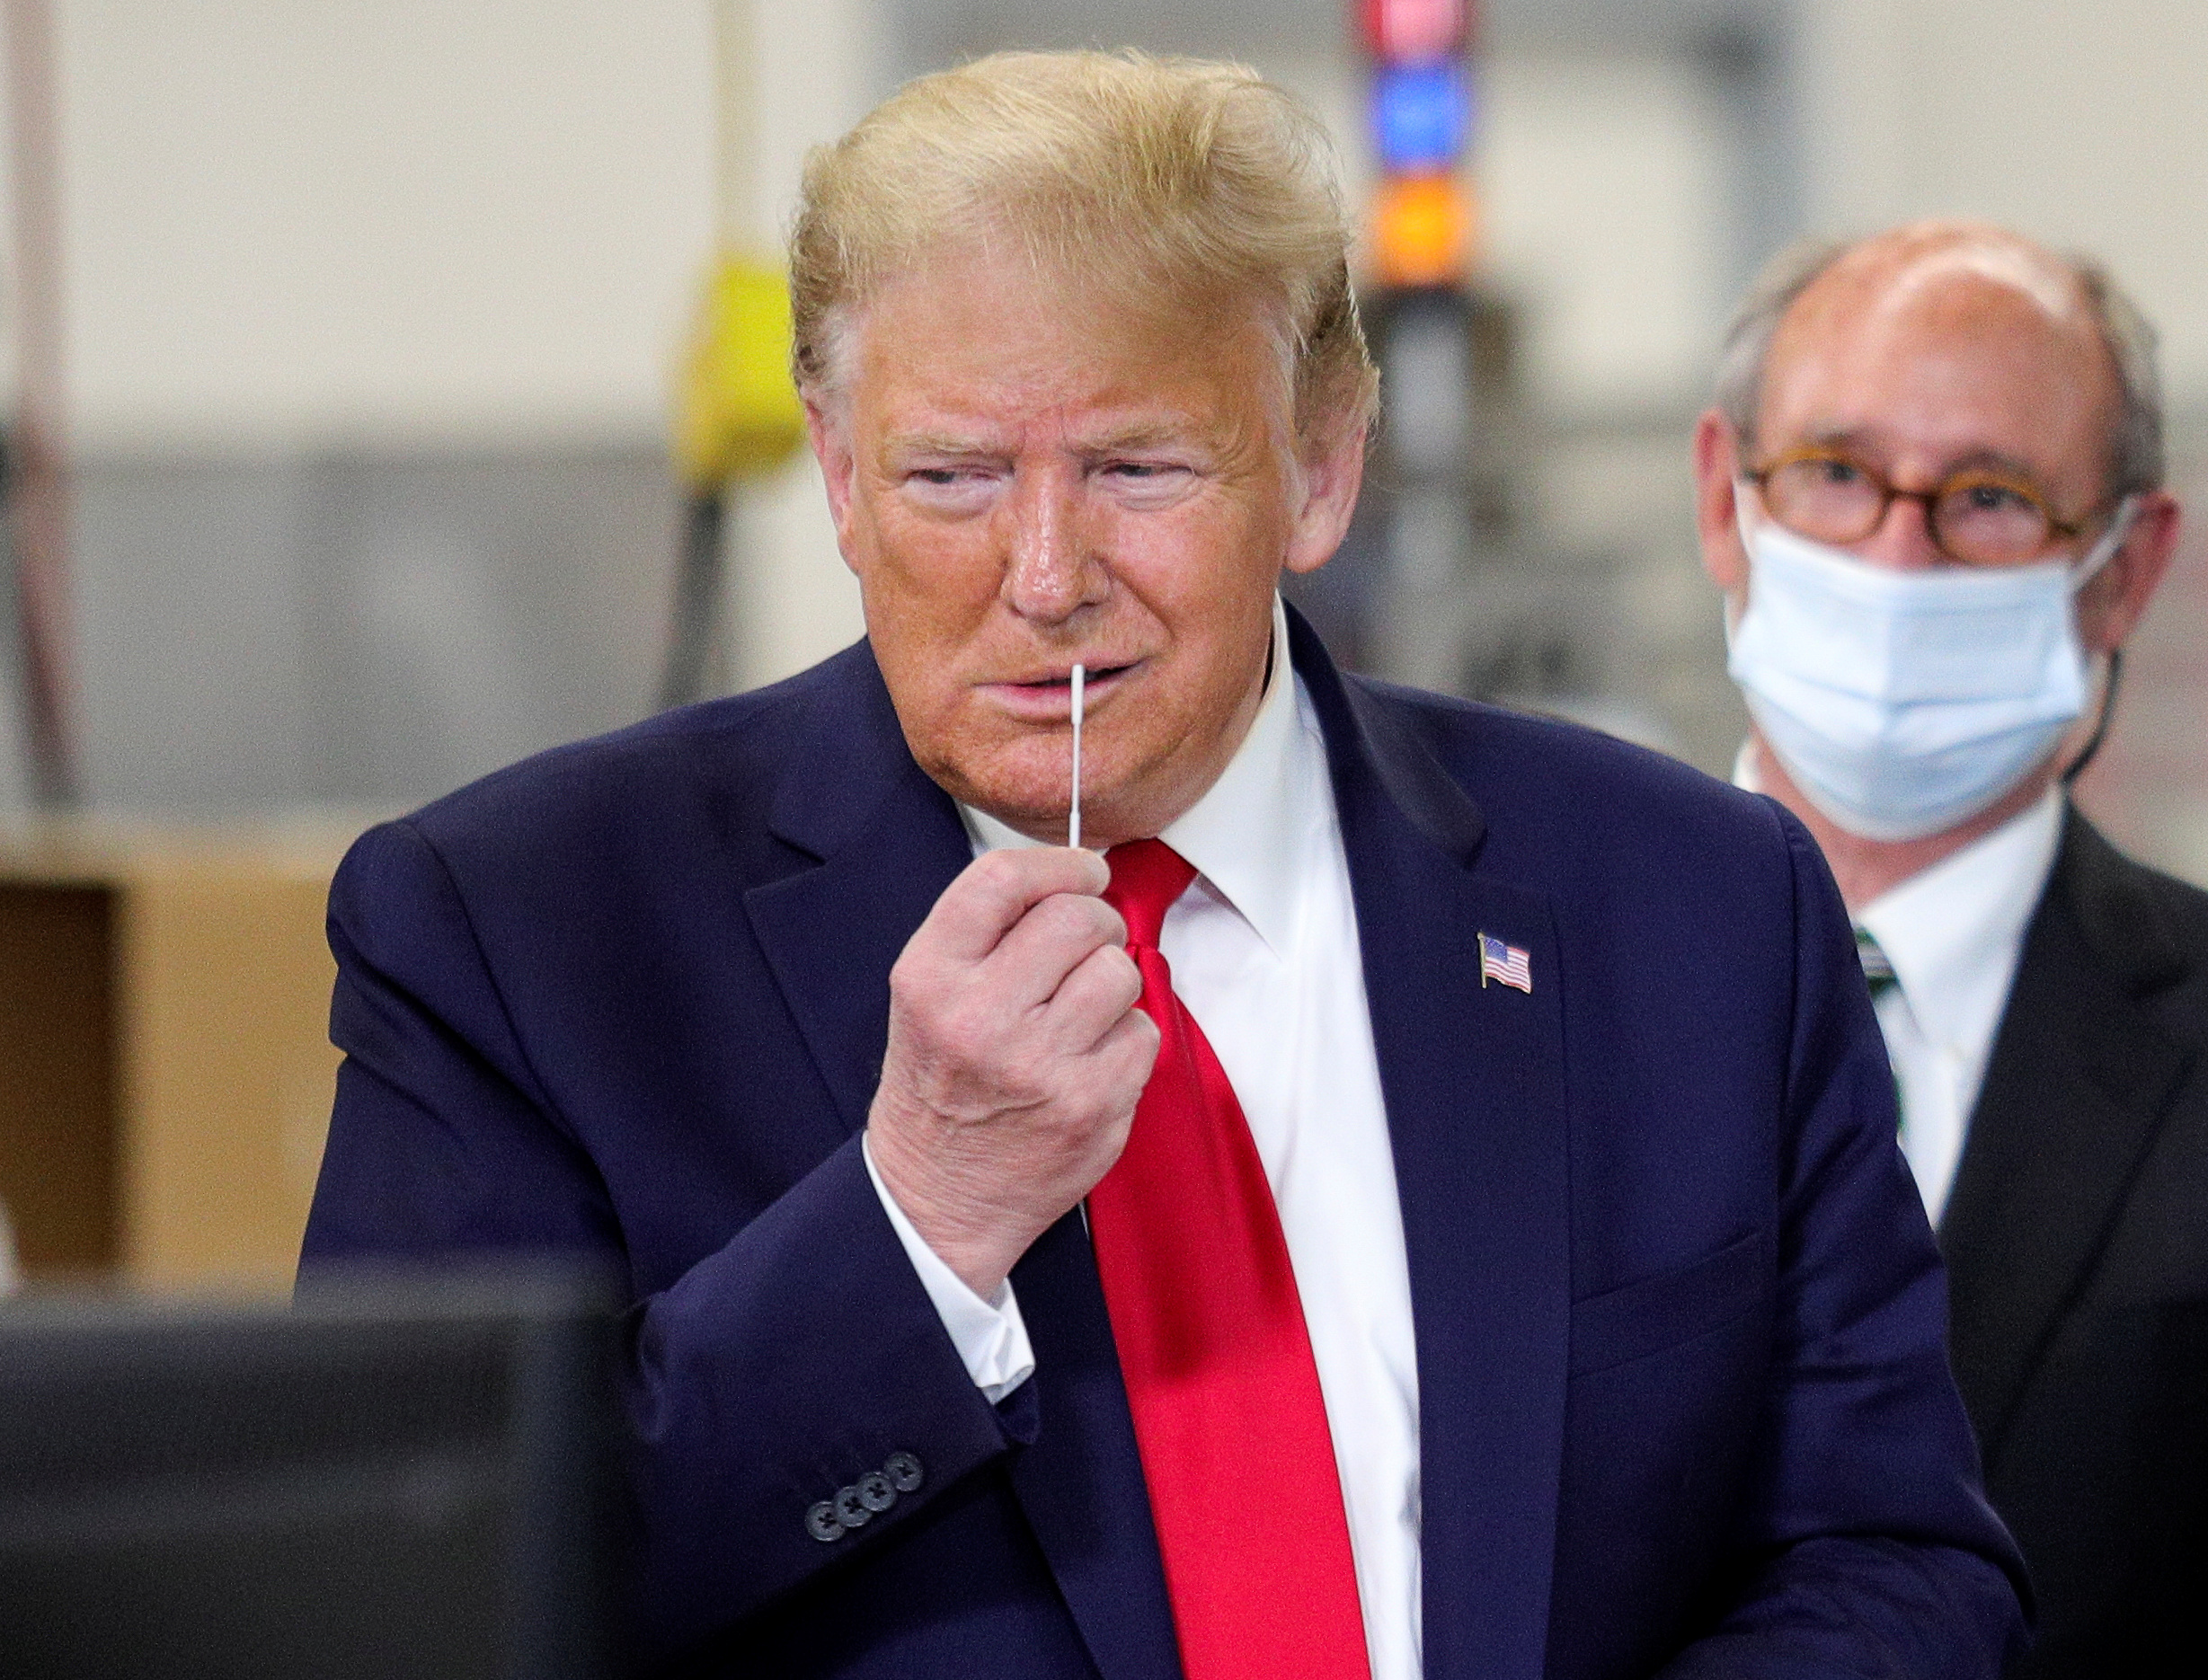 U.S. President Donald Trump pretends to insert a nose swap as he tours Puritan Medical Products manufacturing facility, where swabs for coronavirus disease (COVID-19) tests are made, in Guilford, Maine, U.S., June 5, 2020. REUTERS/Tom Brenner?